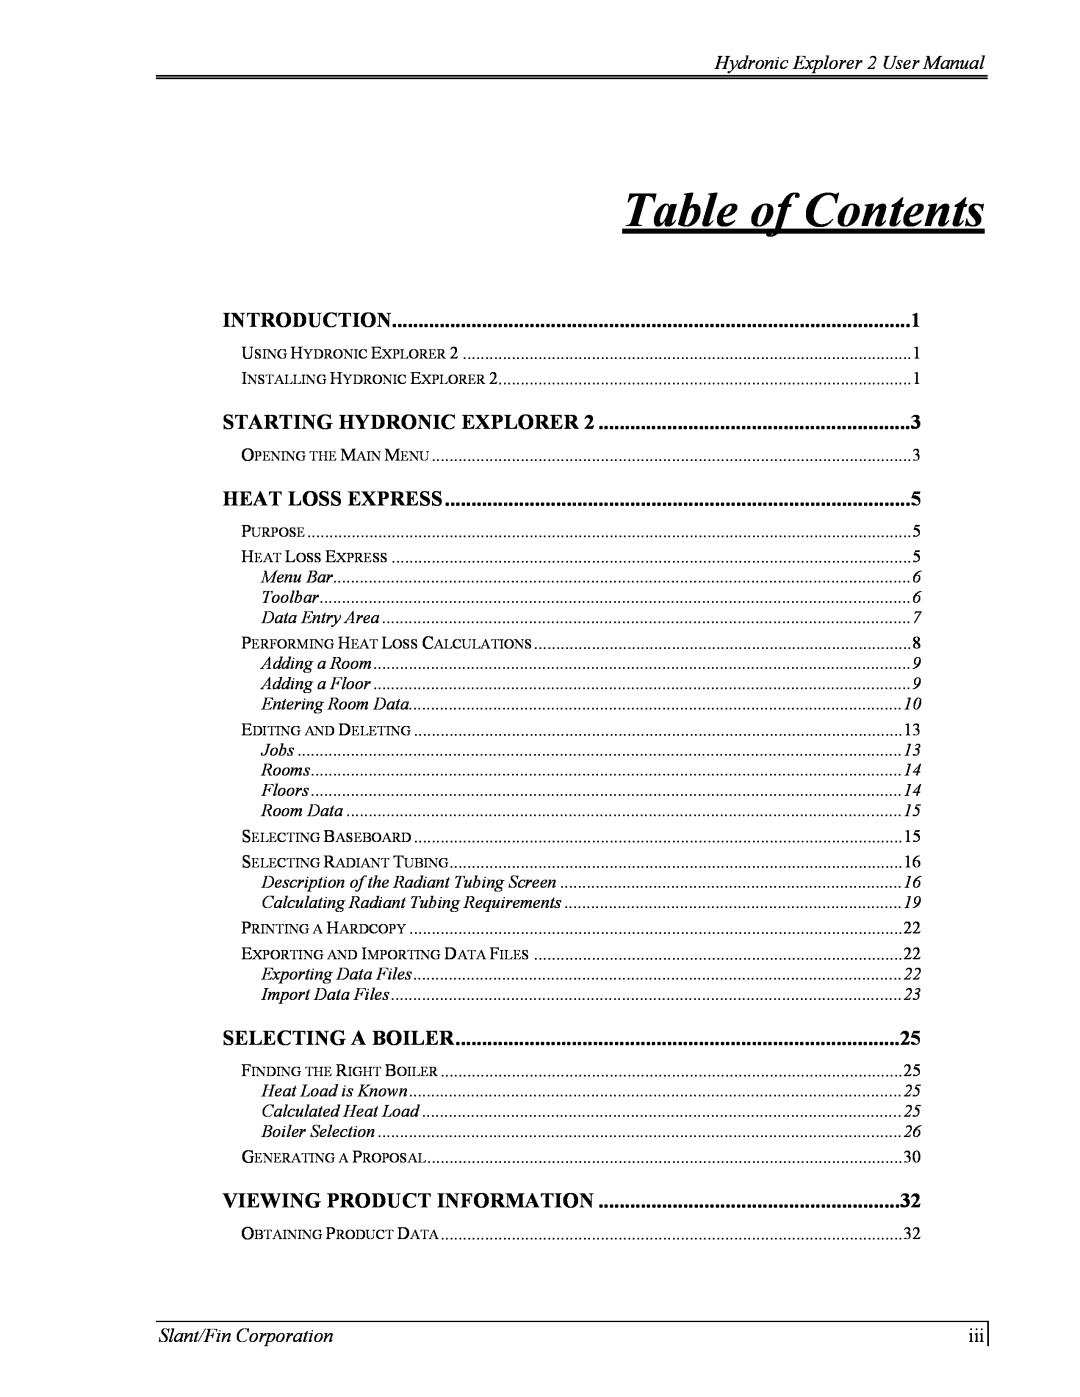 Slant/Fin Hydronic Explorer 2 Table of Contents, Selecting A Boiler, Viewing Product Information, Slant/Fin Corporation 